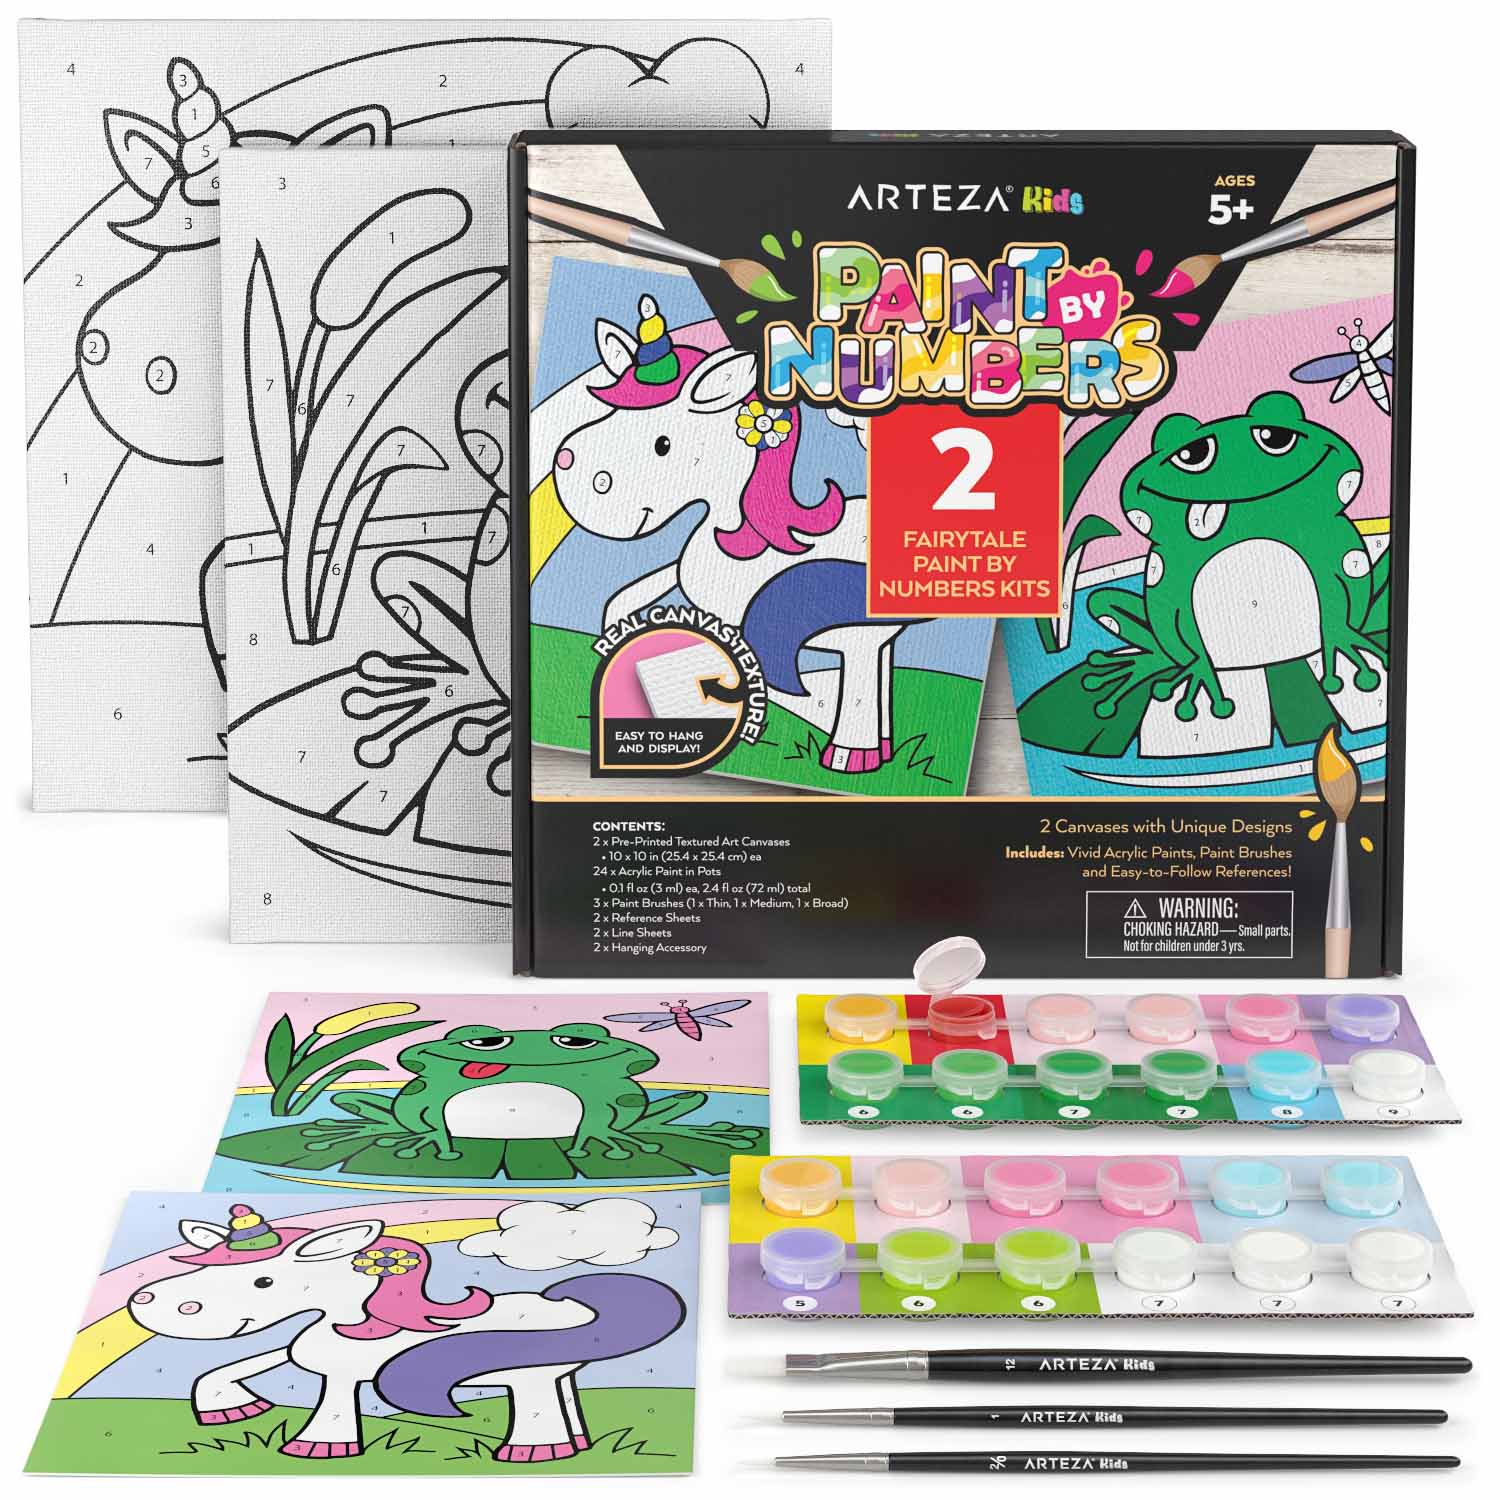 Arteza Kids Paint by Numbers Kit, 10 x 10 Inches, Pre-Printed Fairytale Canvas Painting Kit with 2 Canvases, 24 Acrylic Paint Pots, 3 Paintbrushes